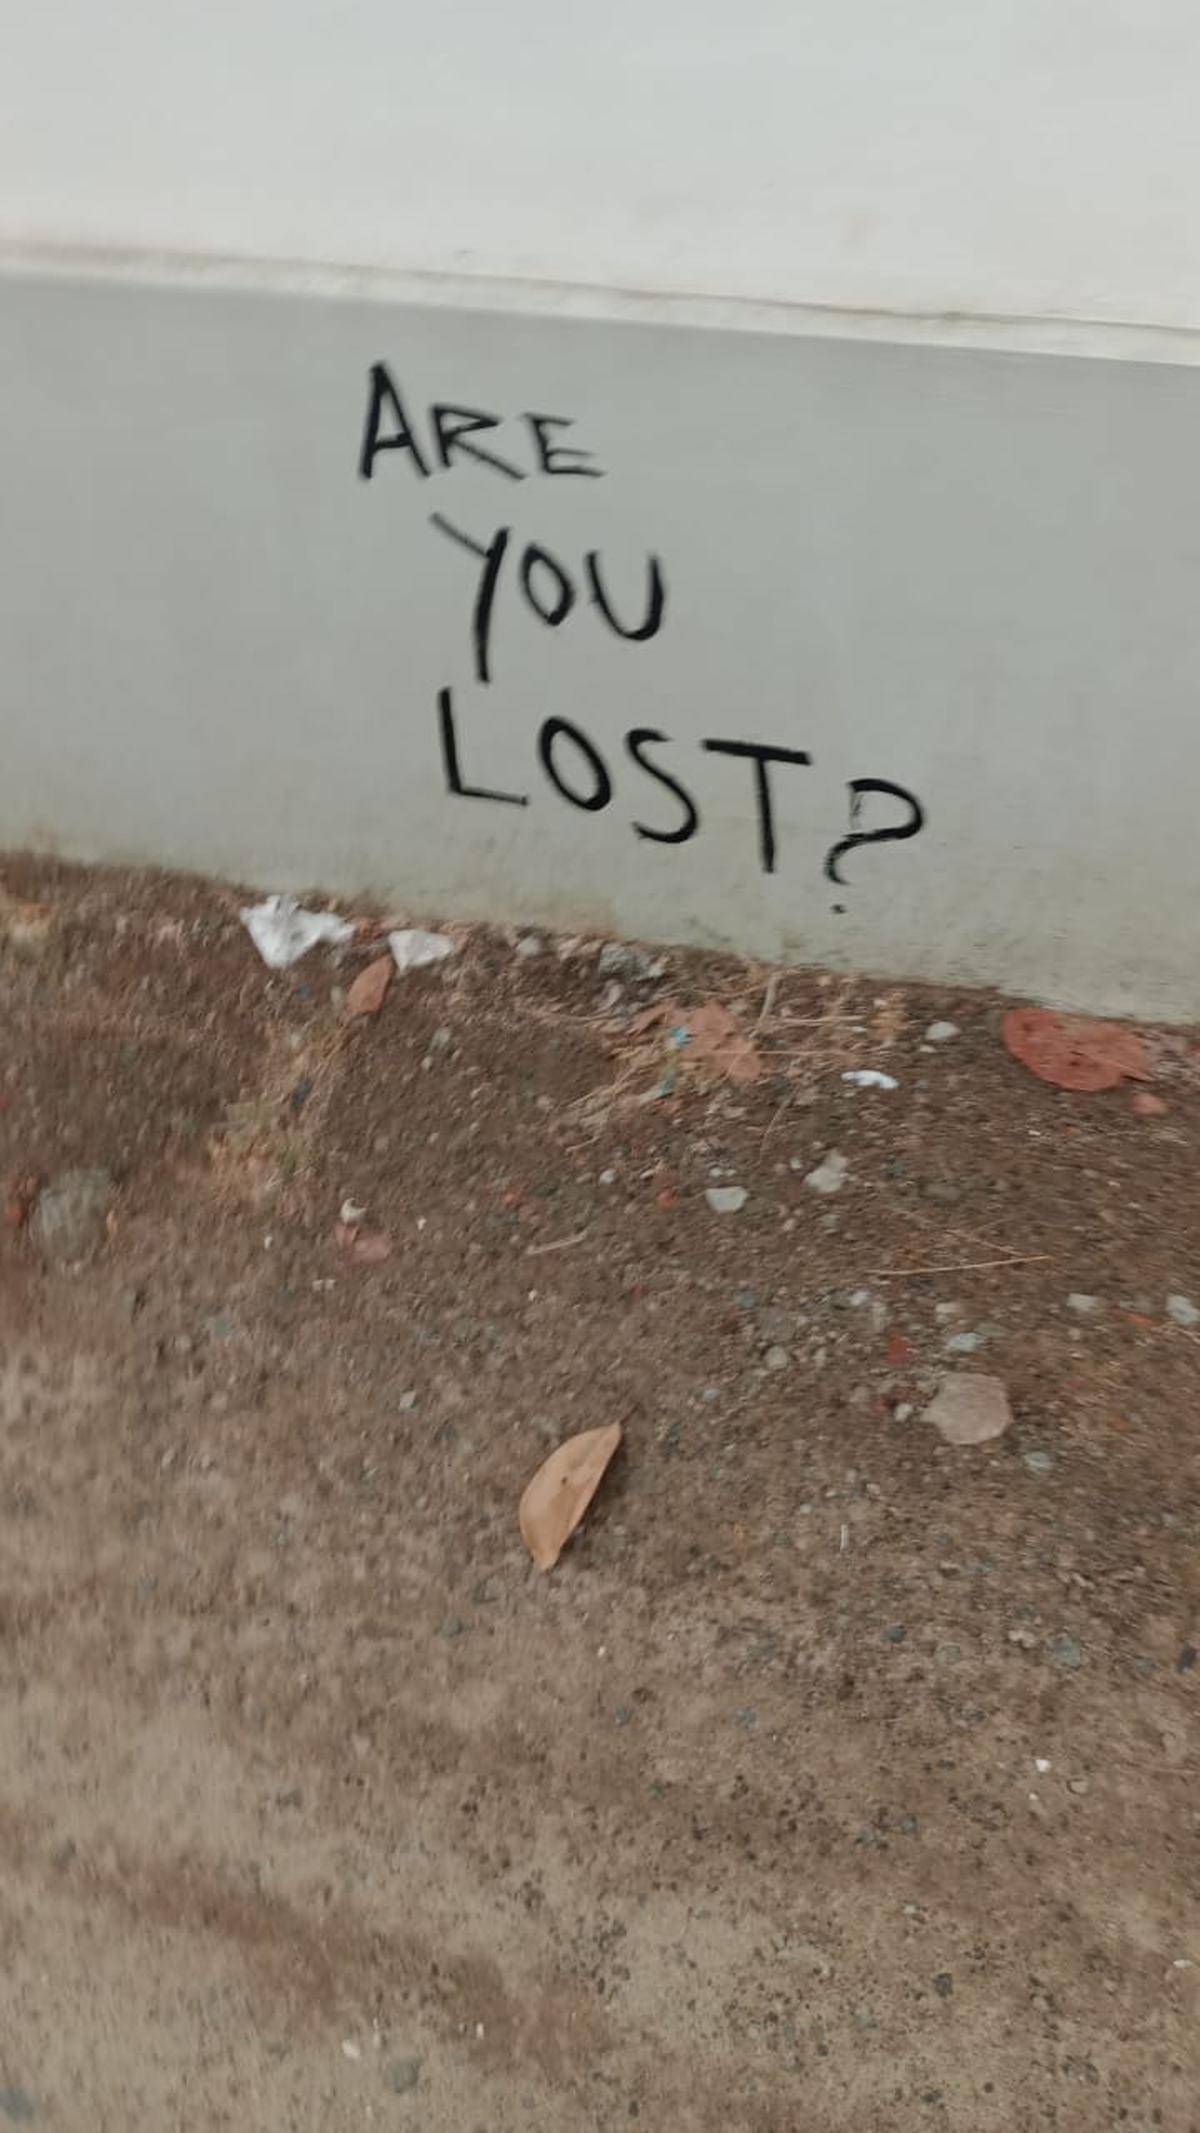 A graffiti found on a wall in Vennala division of the Kochi Corporation in Kerala recently.